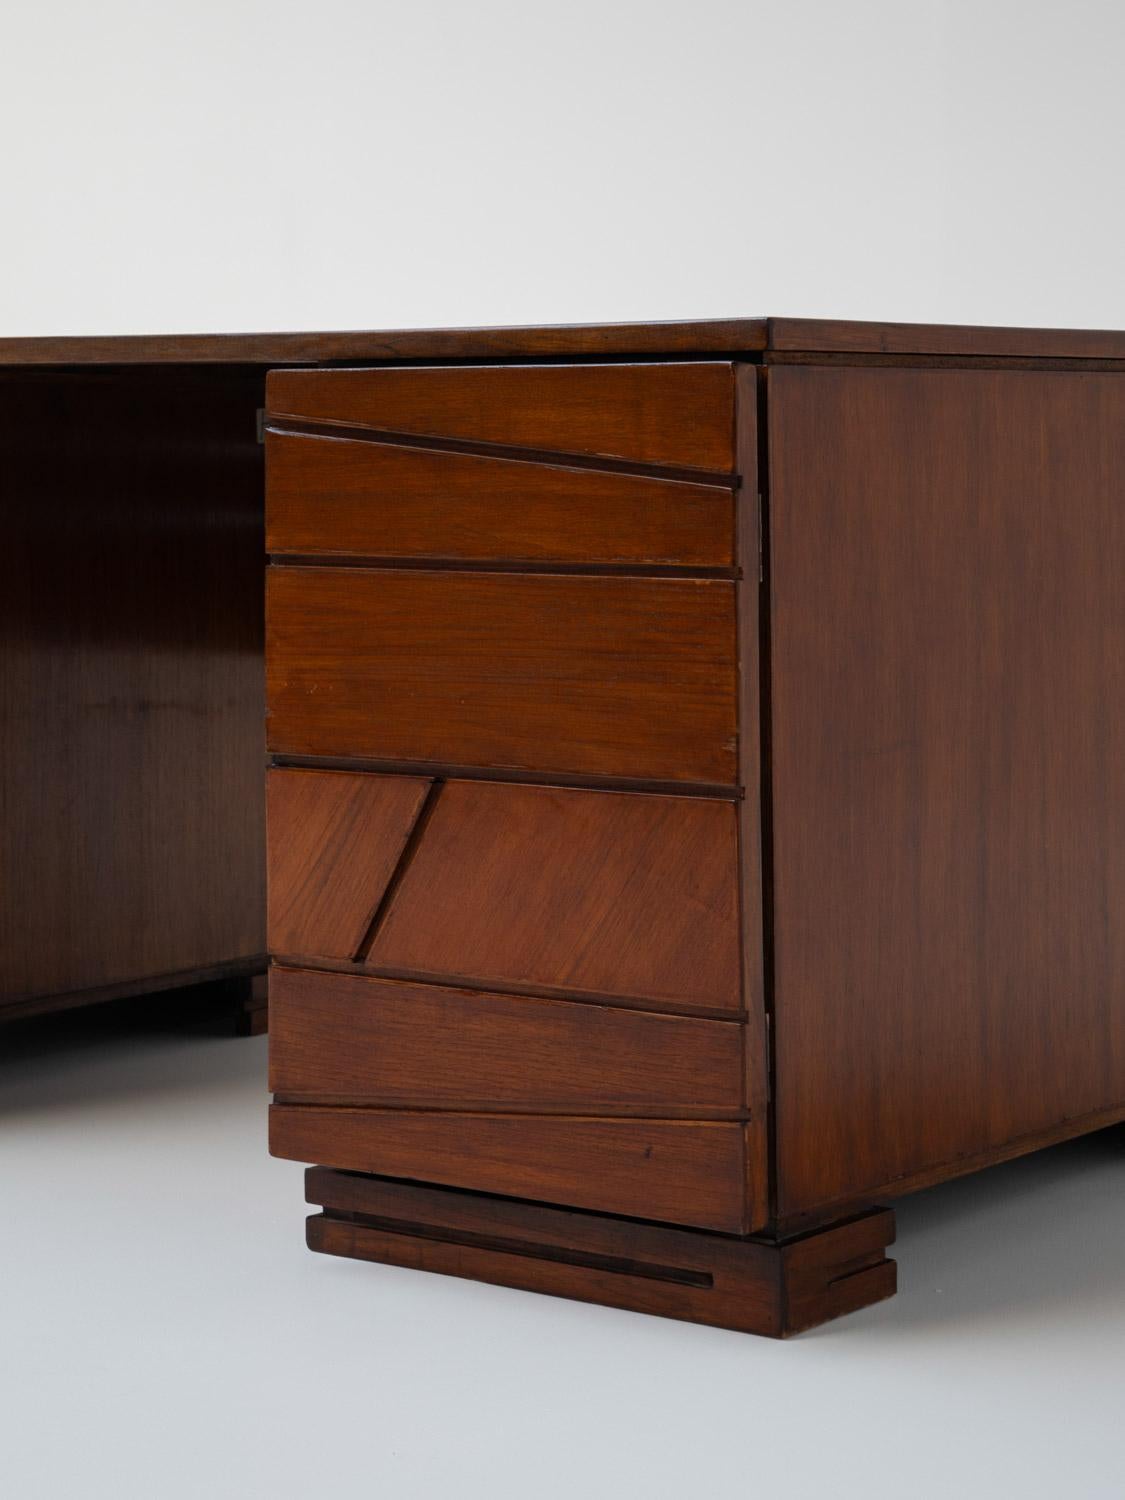 Late 20th Century French Wooden Modernist Desk, France 1970s For Sale